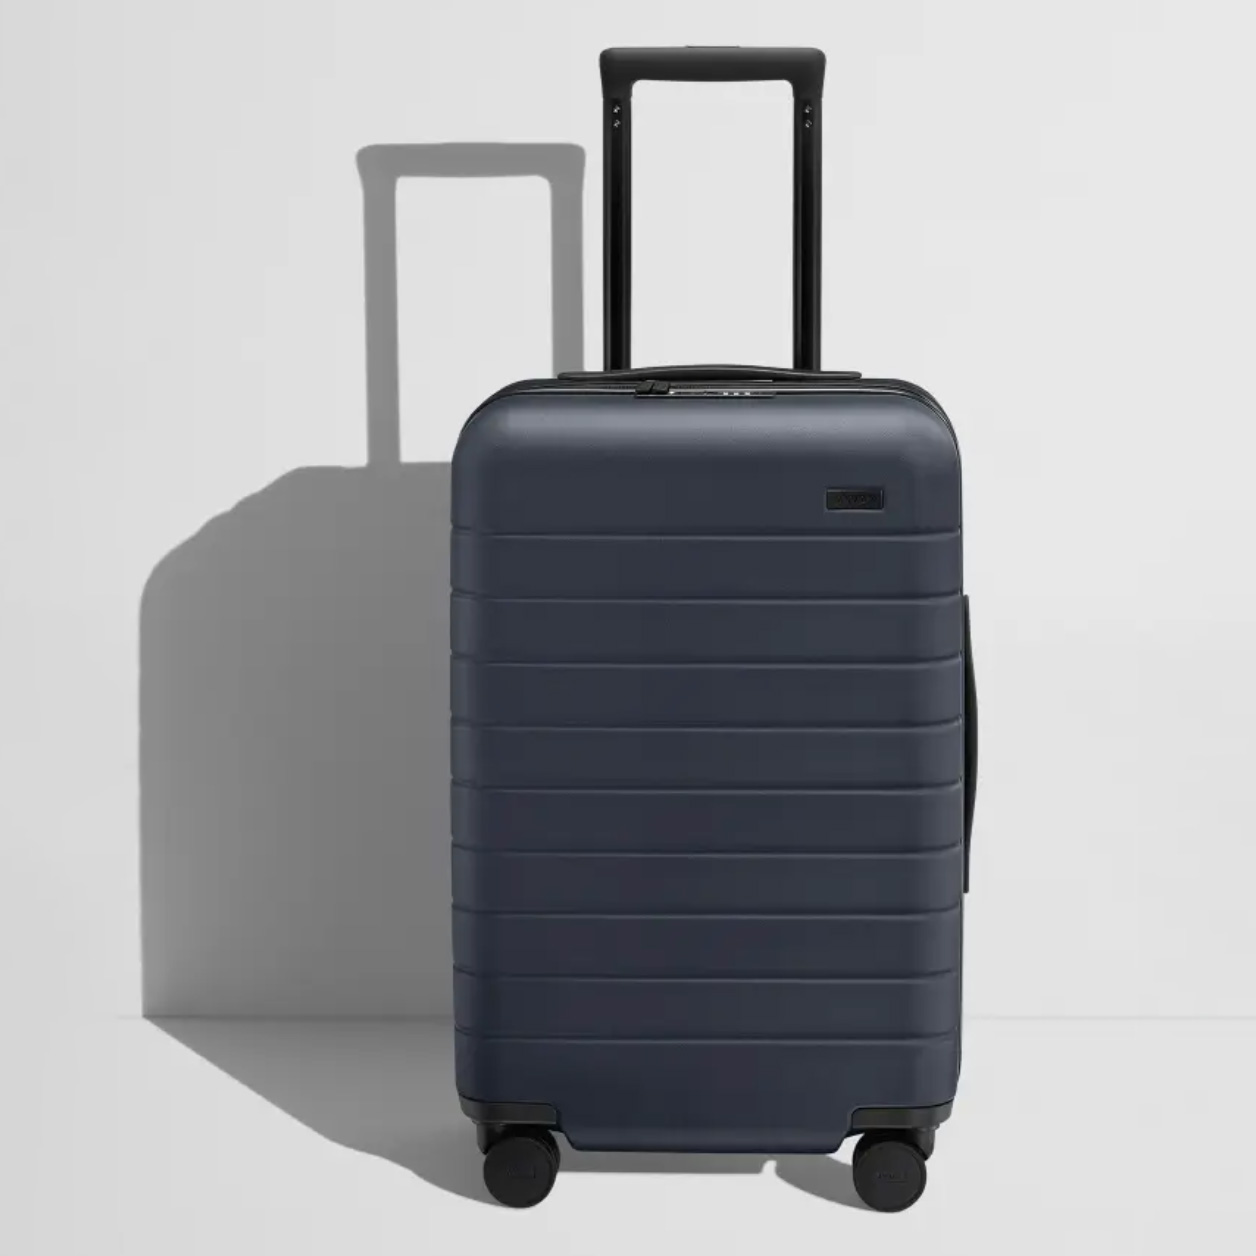 Front view of black hardside carry-on luggage